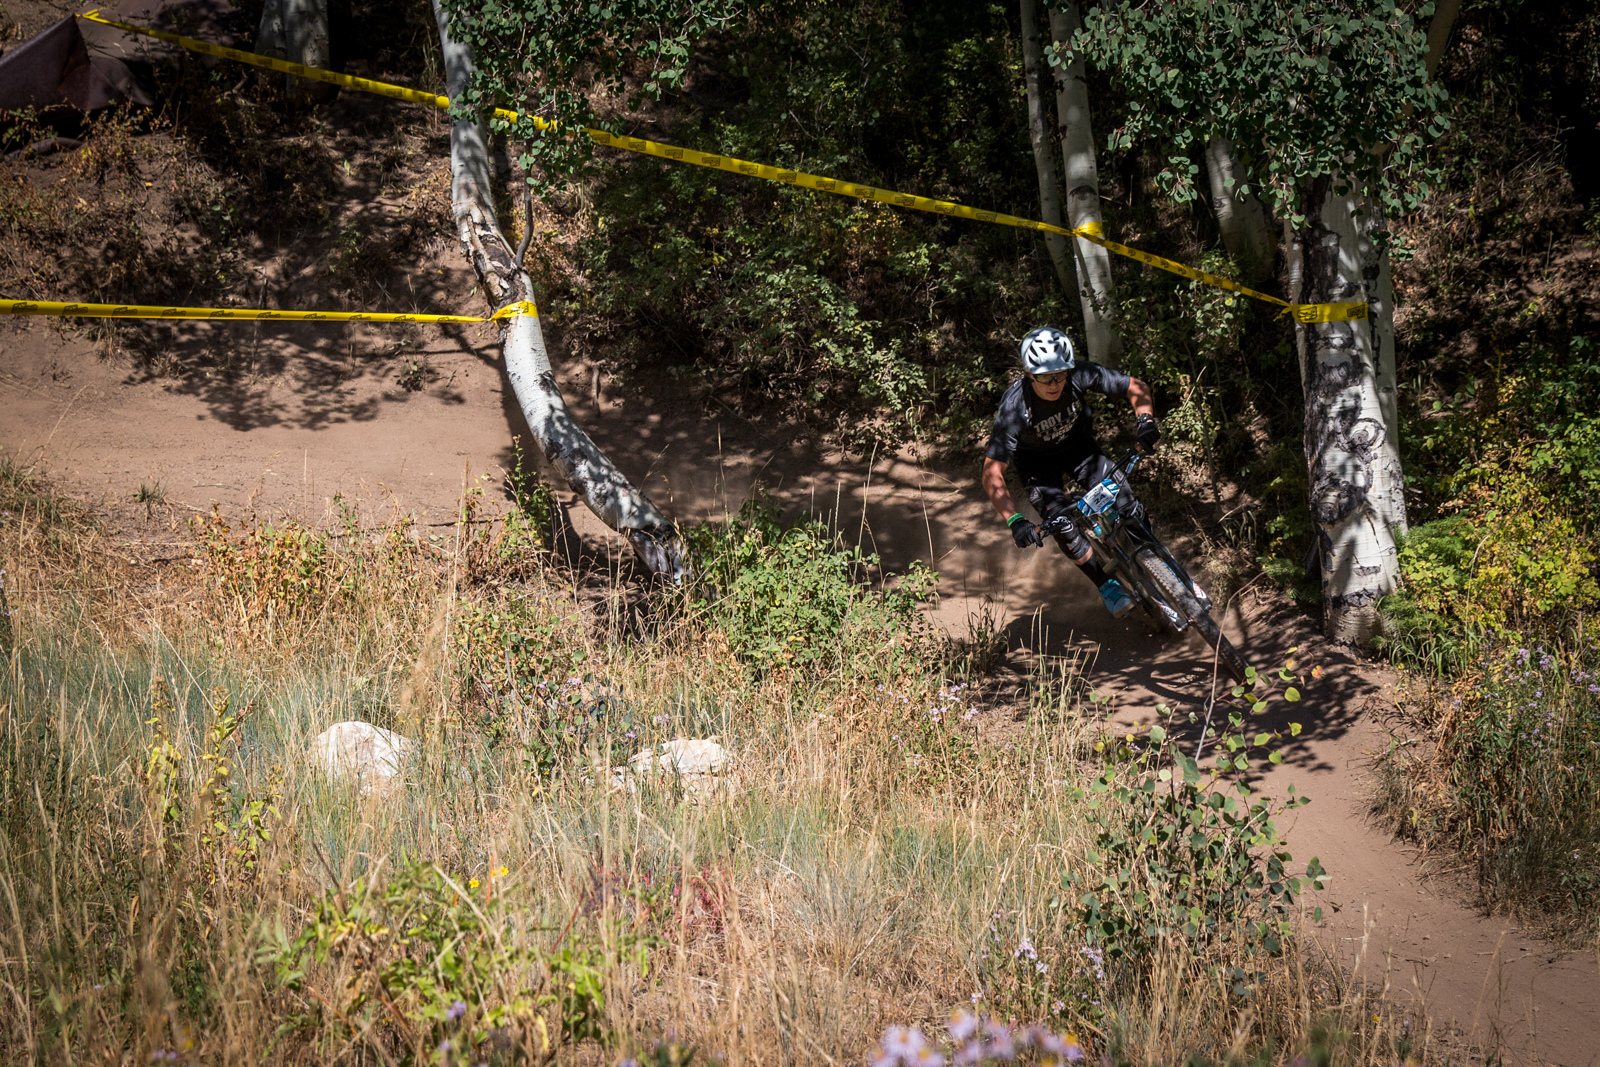 Mitch Ropelato races Stage Two of the SCOTT Enduro Cup at Deer Valley Resort in Park City, UT on Aug. 28, 2016